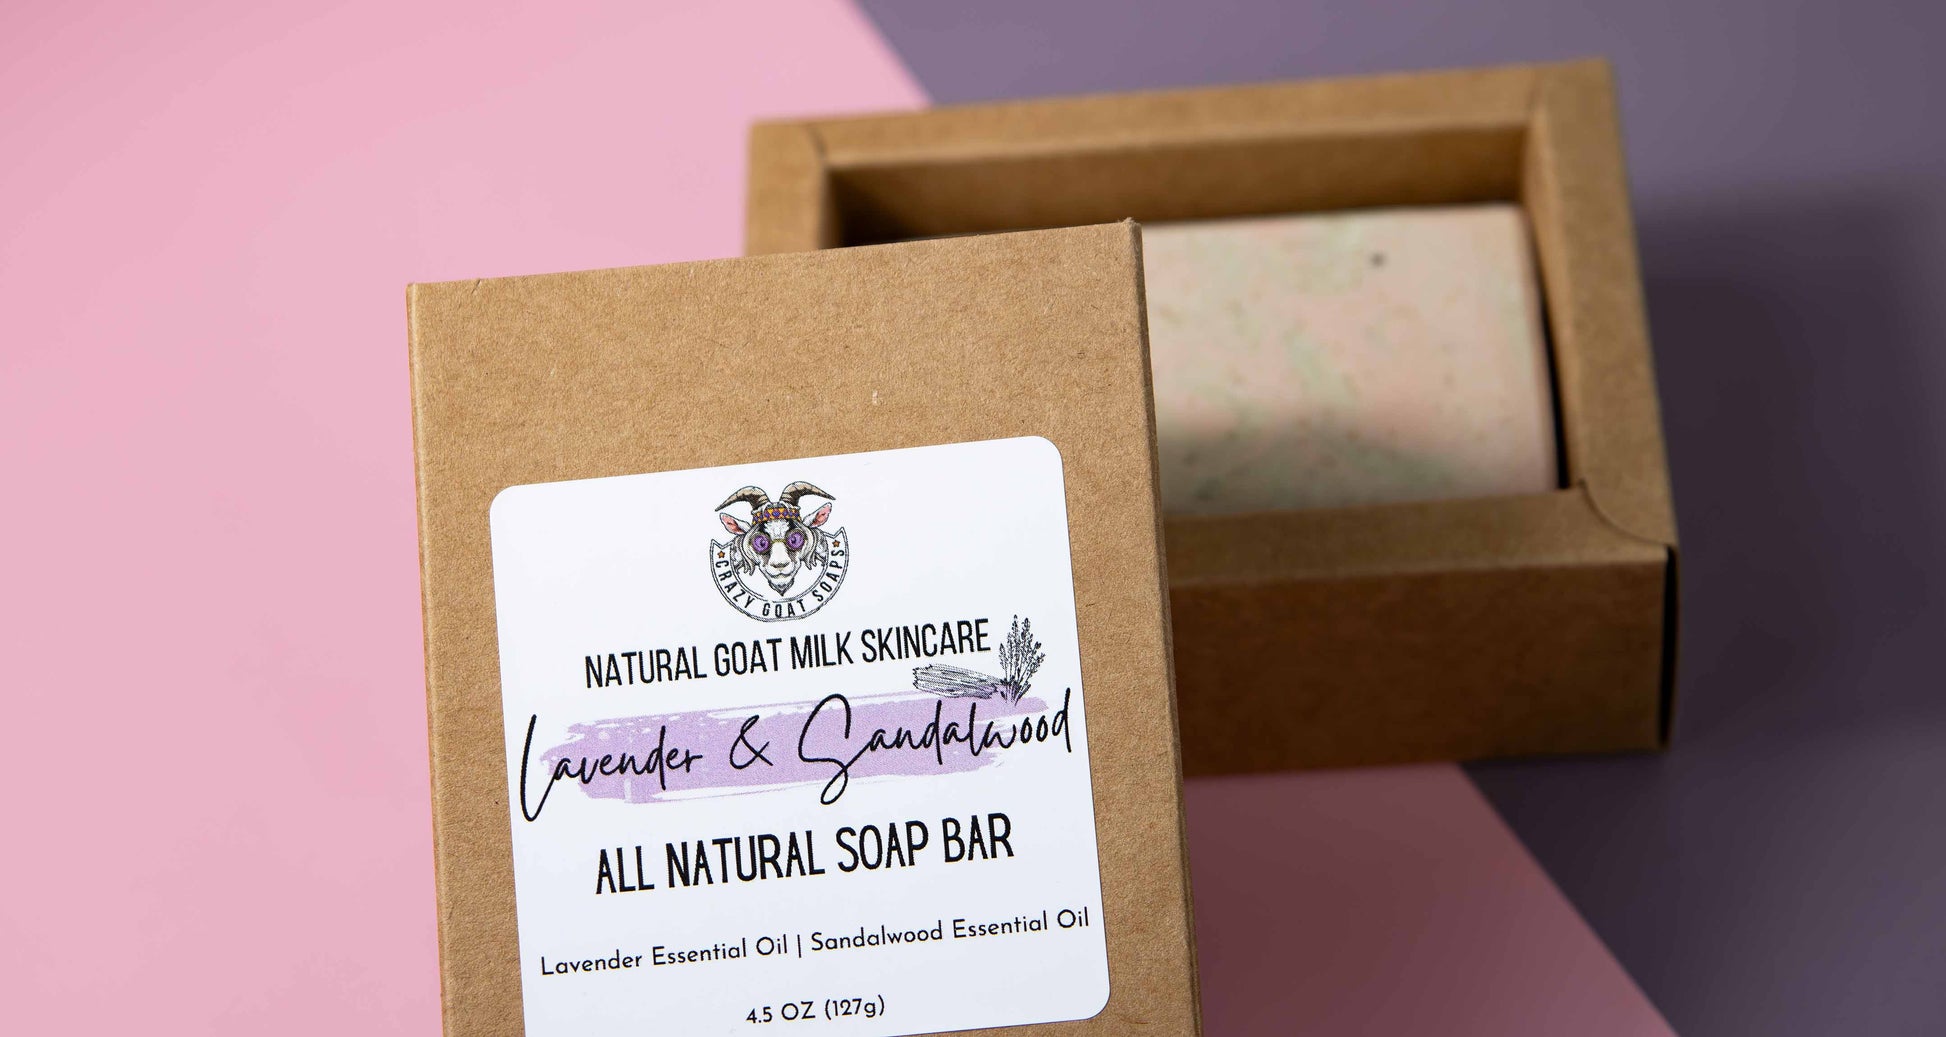 Our All-Natural Lavender and Sandalwood Goat Milk Soap Bar comes fully packaged and labeled.